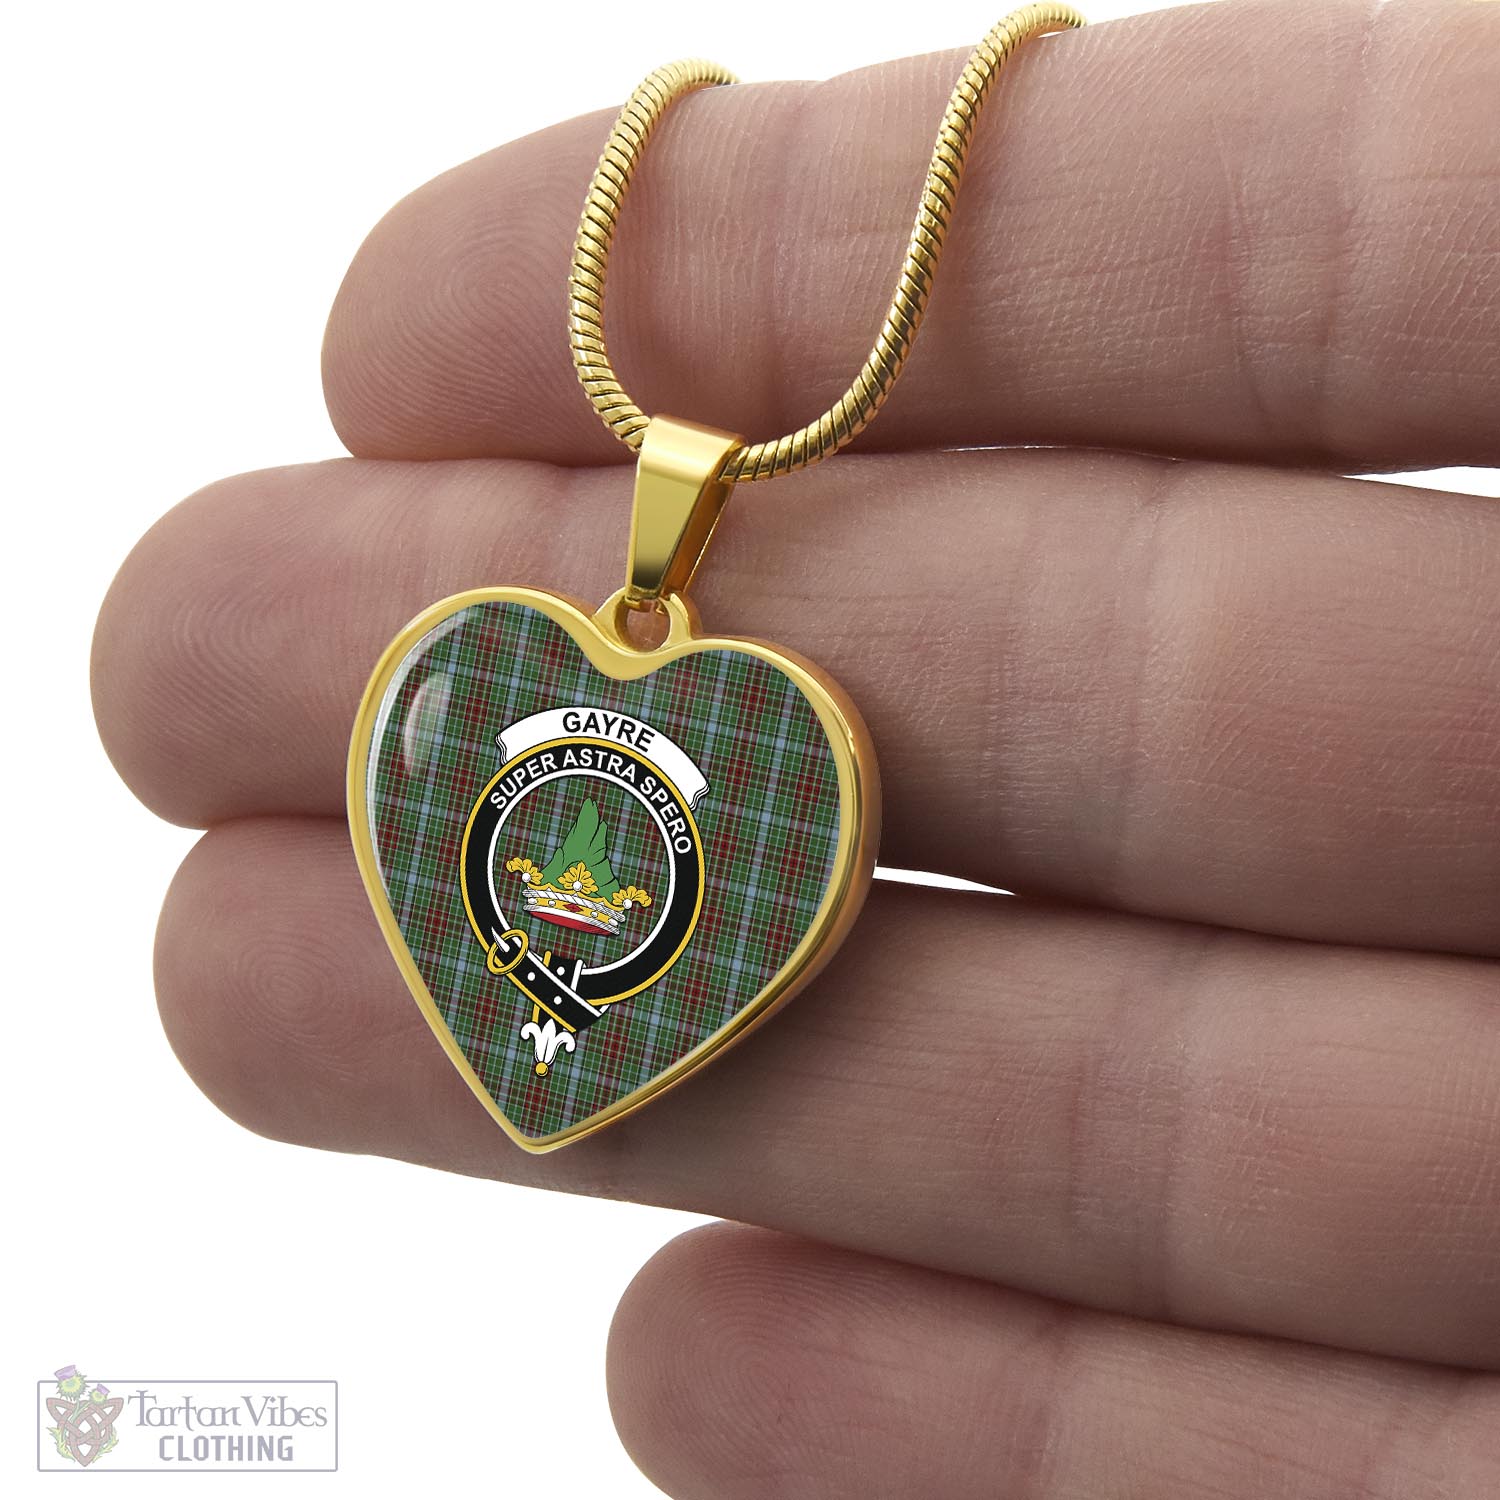 Tartan Vibes Clothing Gayre Tartan Heart Necklace with Family Crest